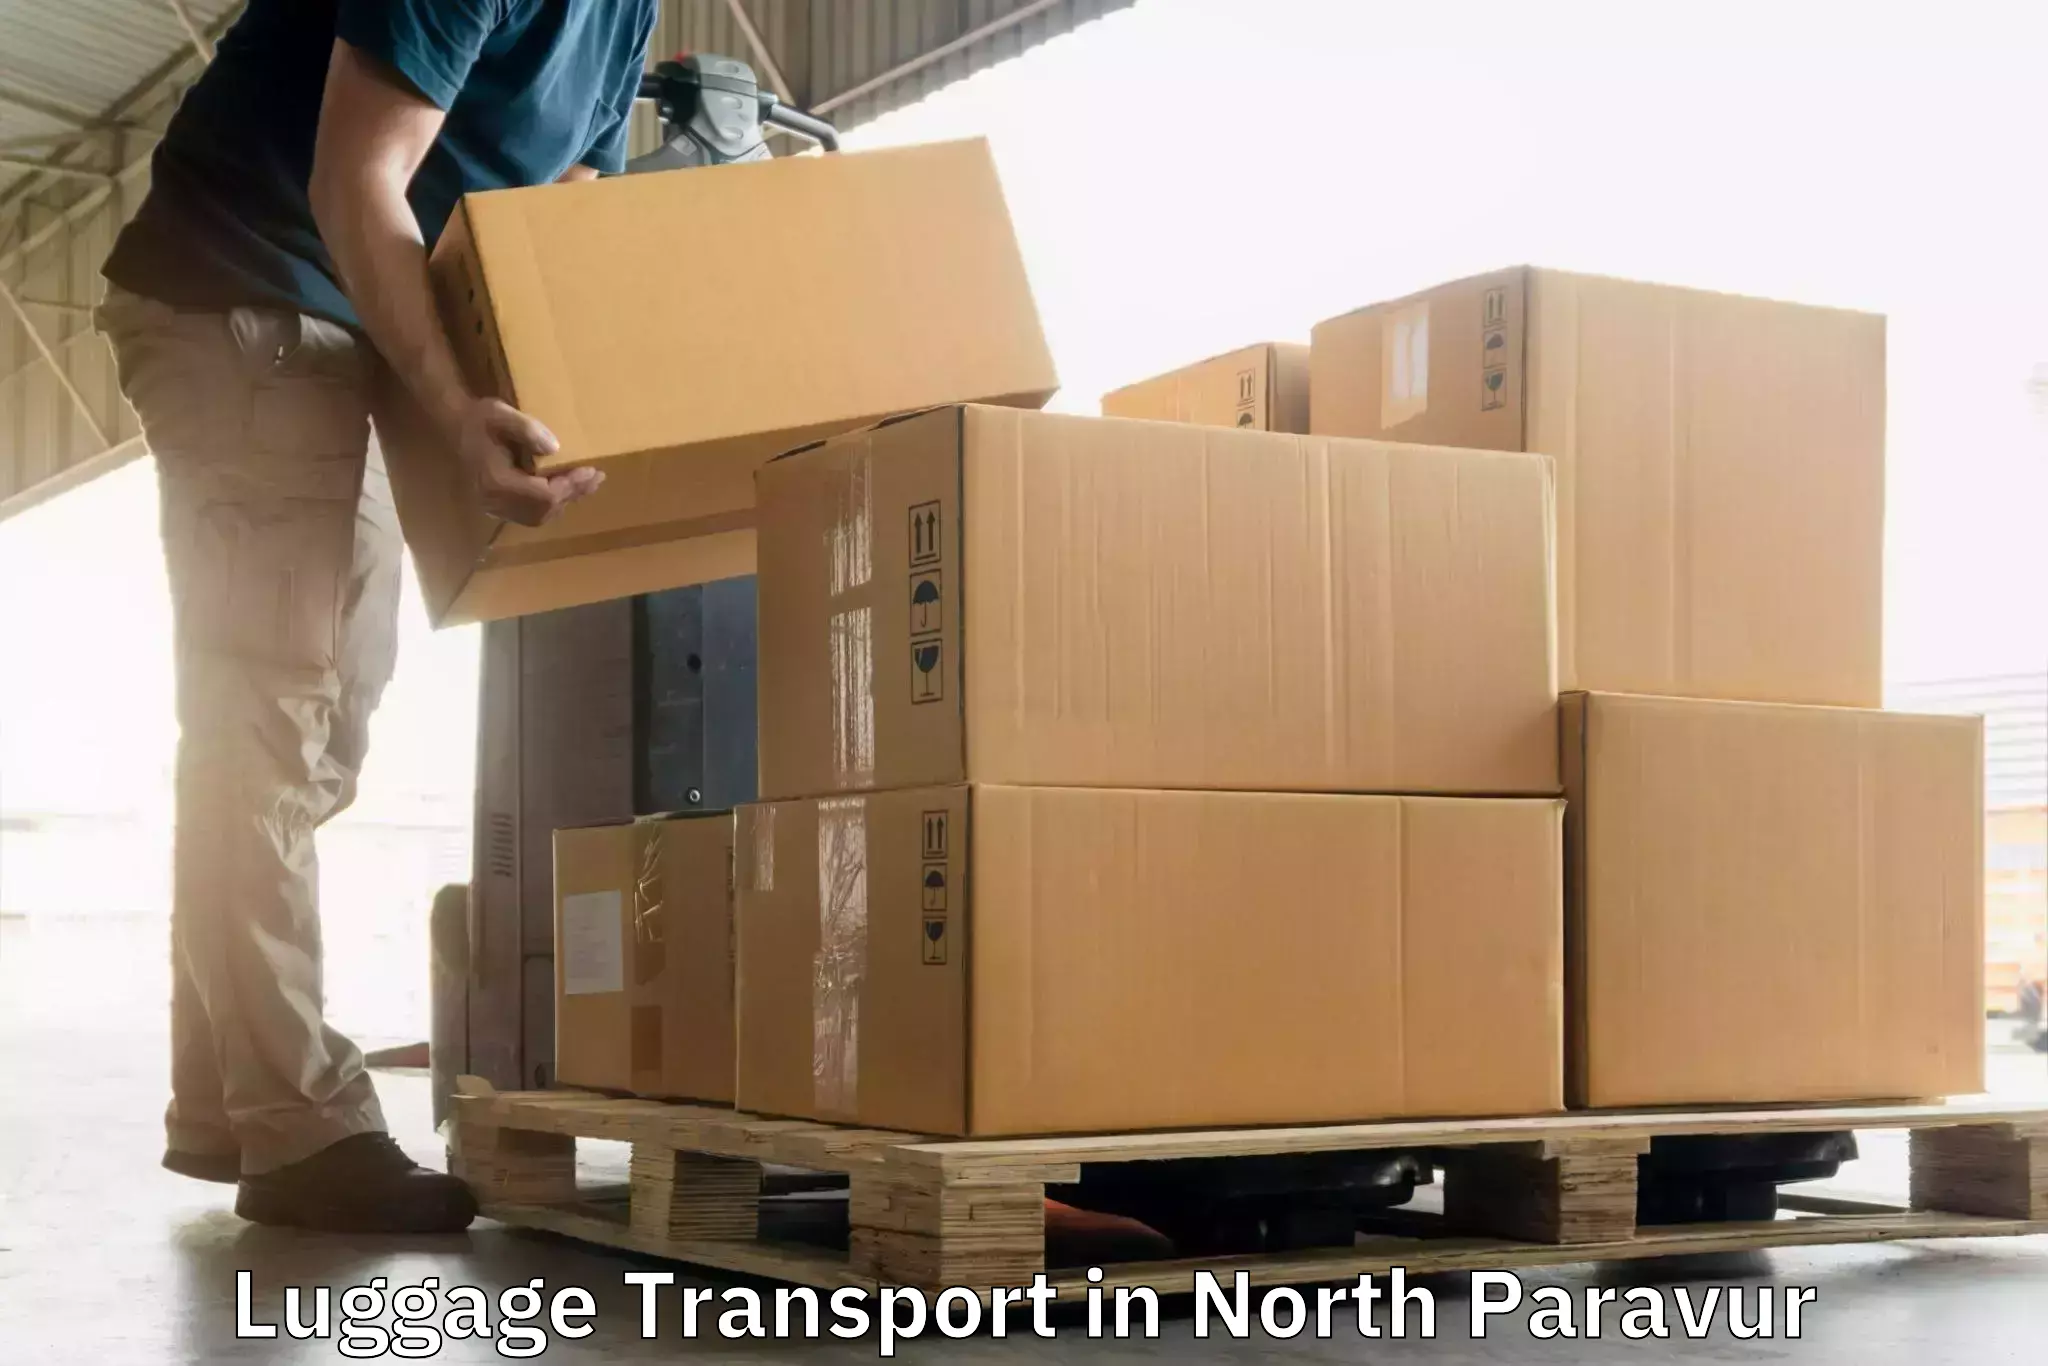 Baggage transport quote in North Paravur